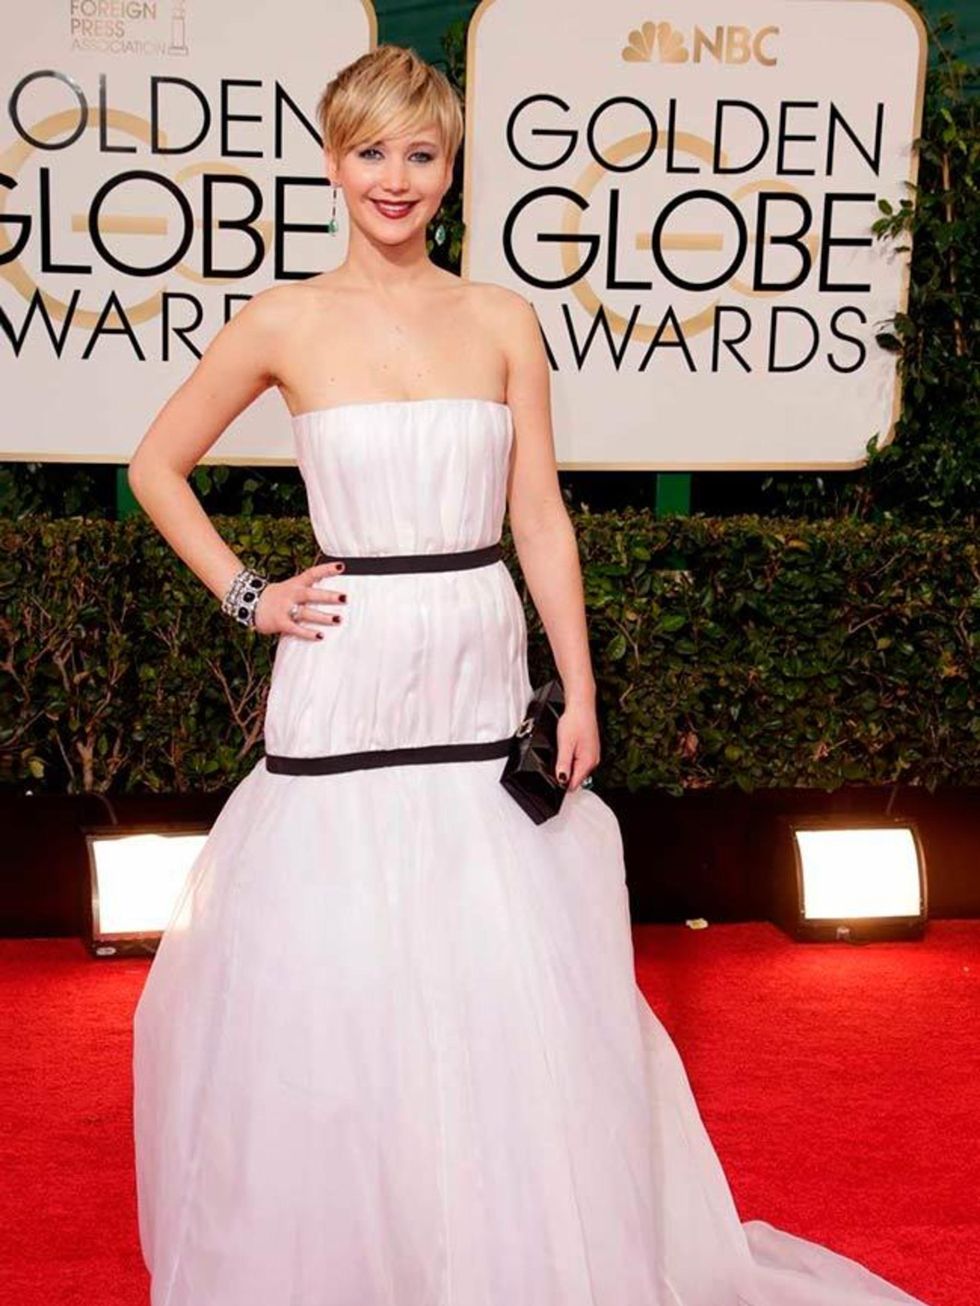 <p><a href="http://www.elleuk.com/star-style/celebrity-style-files/jennifer-lawrence">Jennifer Lawrence</a> wearing Dior is not exactly a surprise but this white strapless gown is pitch perfect in every way. Her cool attitude gives the dress a fresh, yout